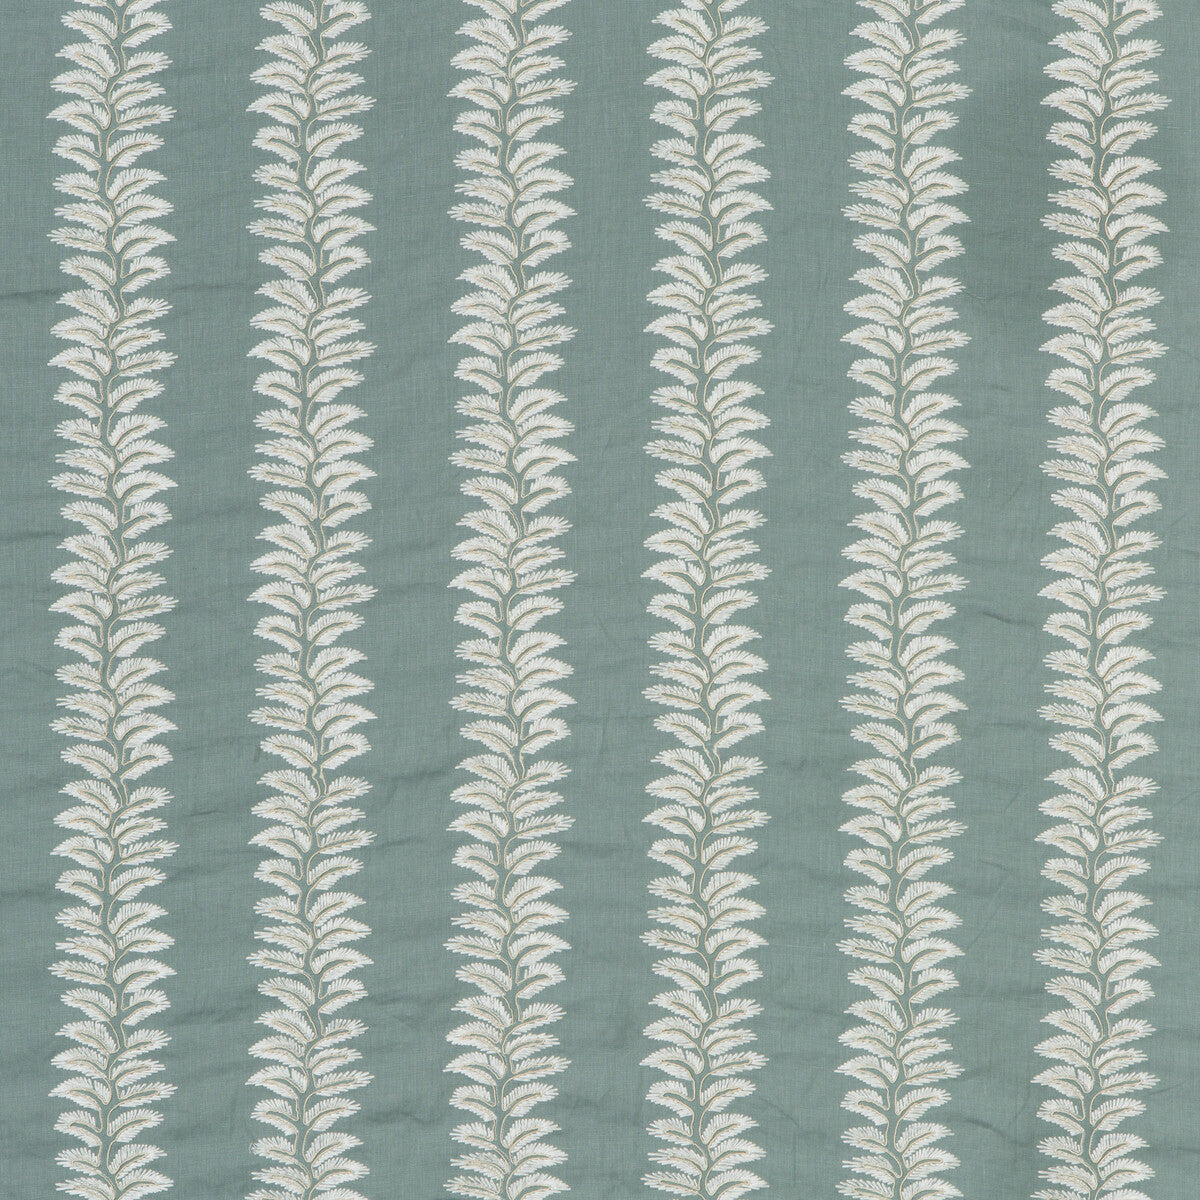 Bradbourne fabric in teal color - pattern BF10533.615.0 - by G P &amp; J Baker in the Langdale collection